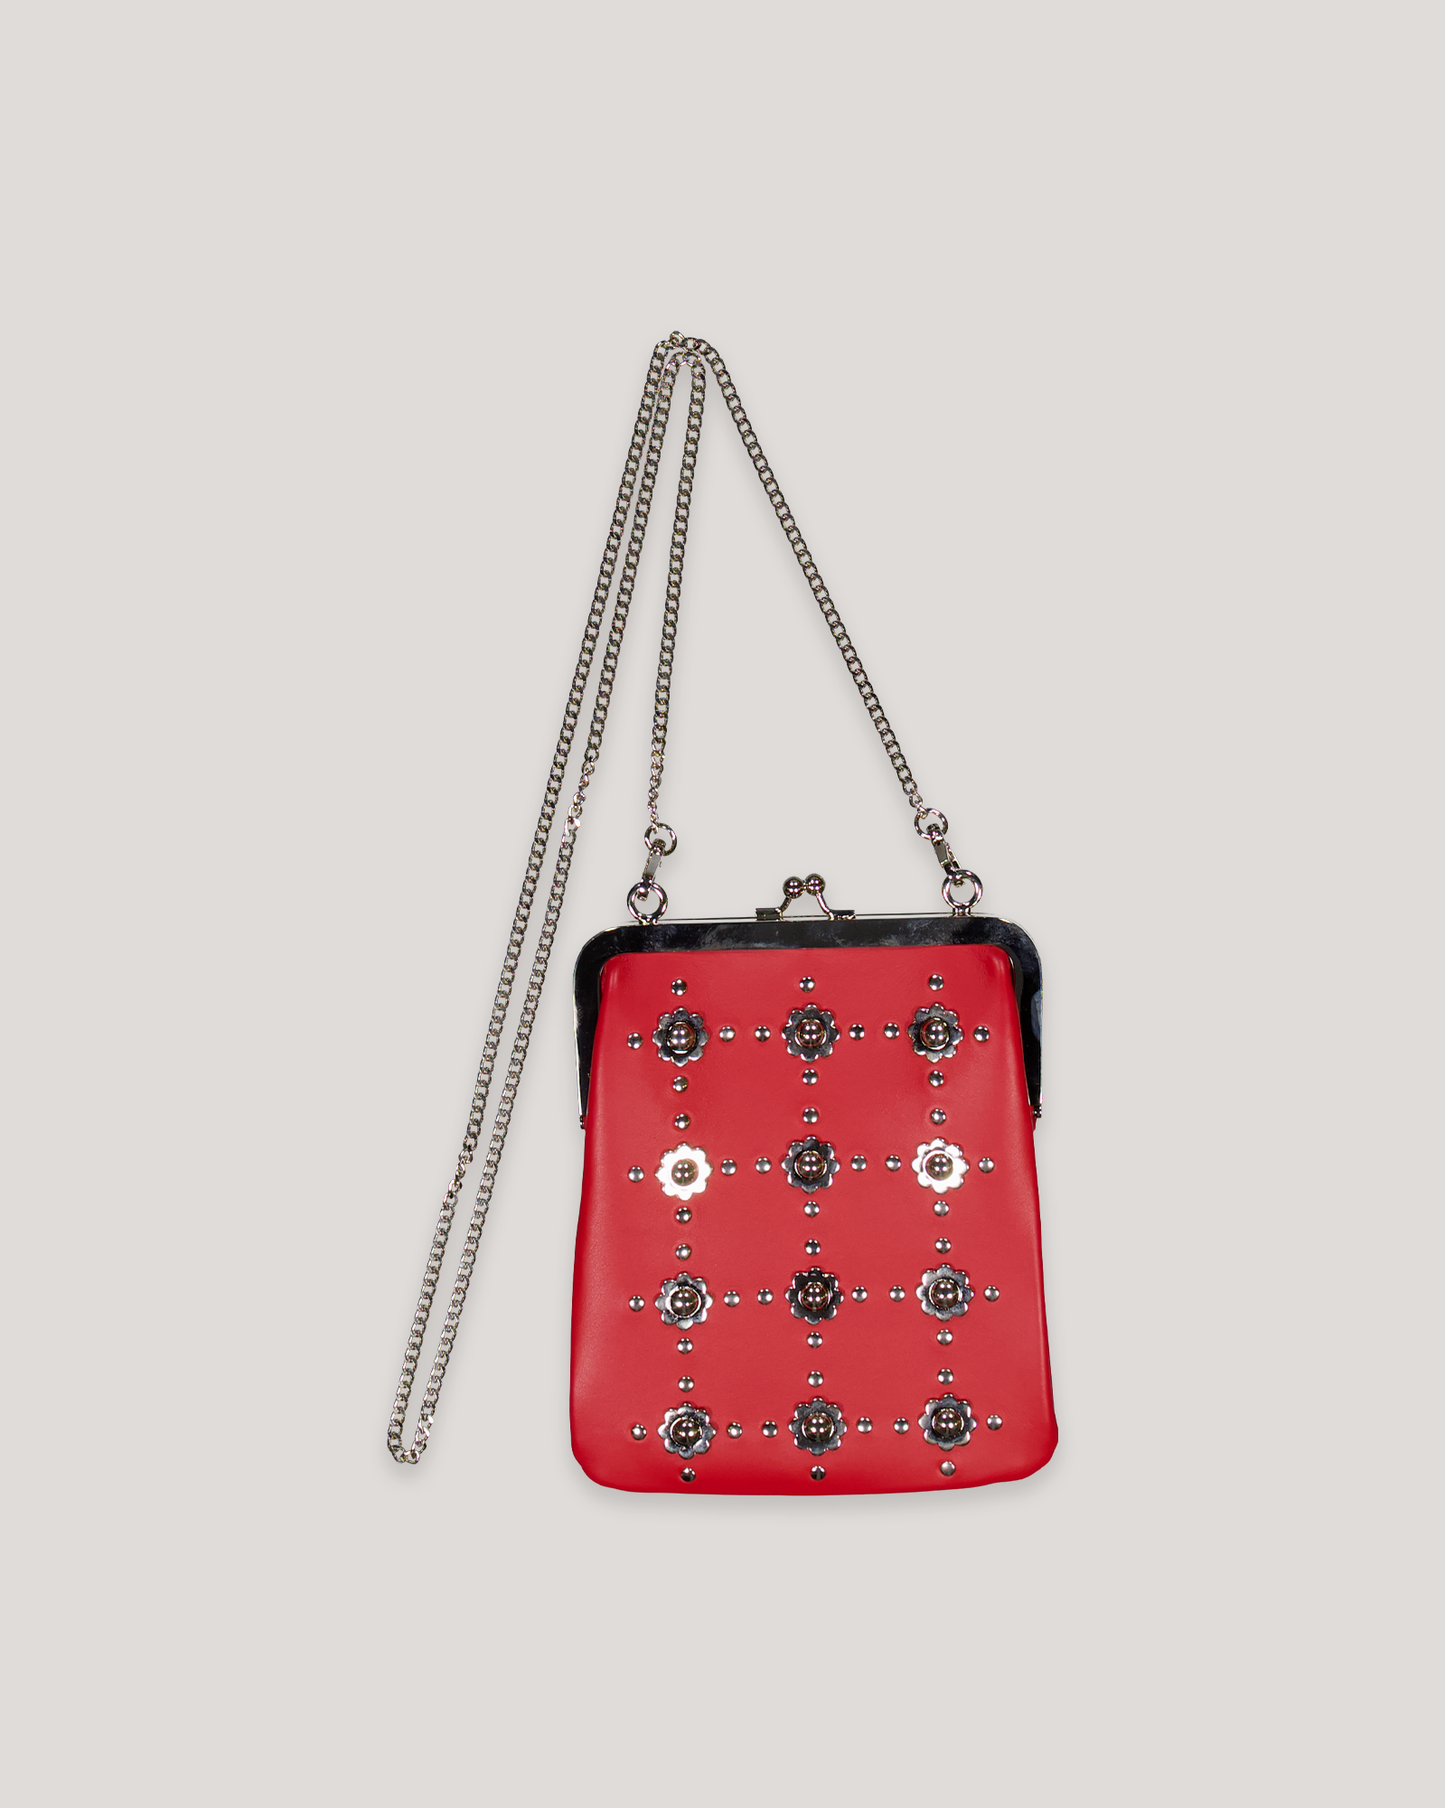 STEFAN COOKE FLORAL STUDDED SNAP POUCH